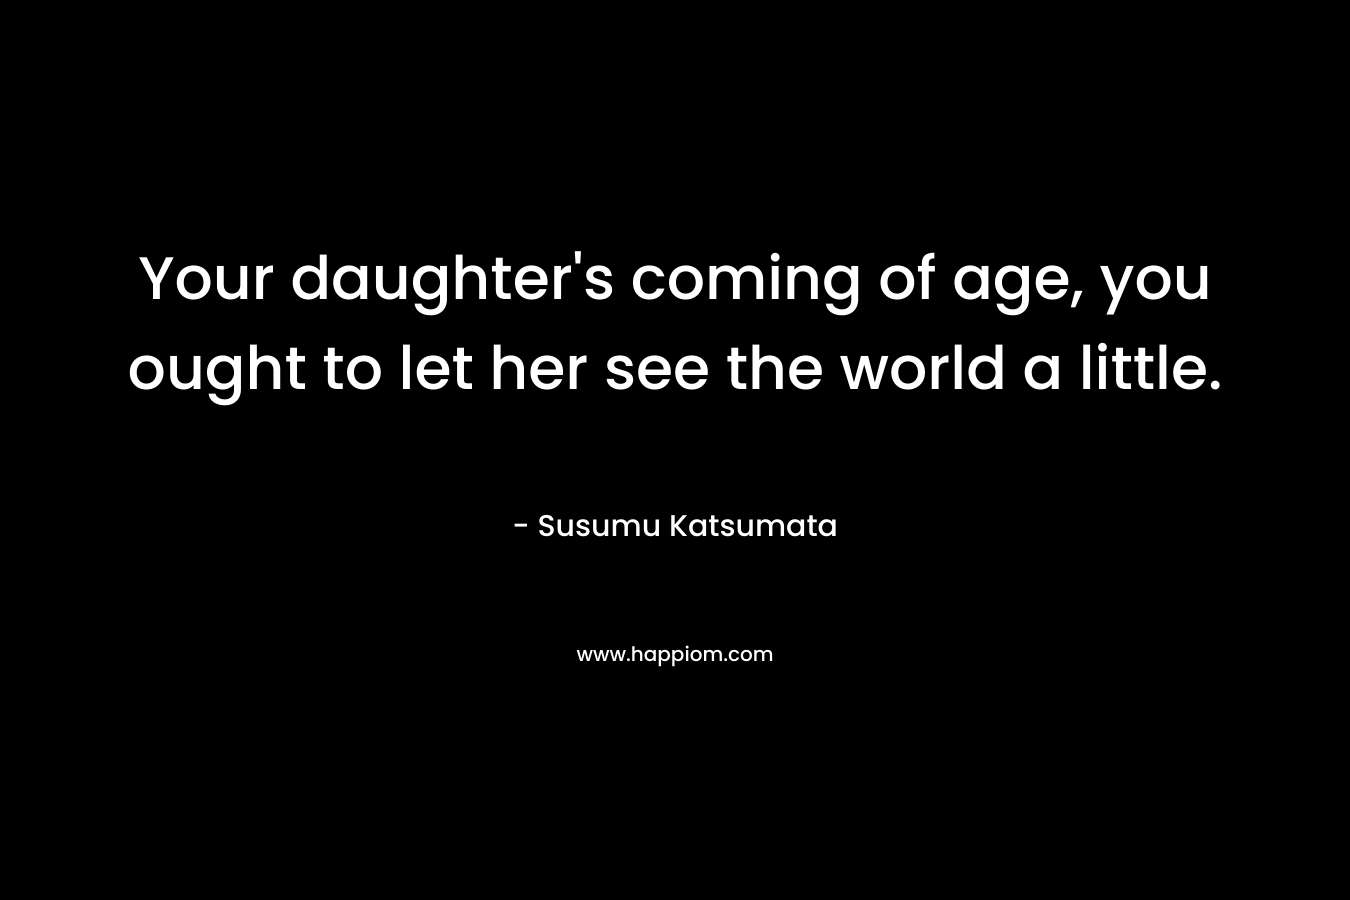 Your daughter's coming of age, you ought to let her see the world a little.